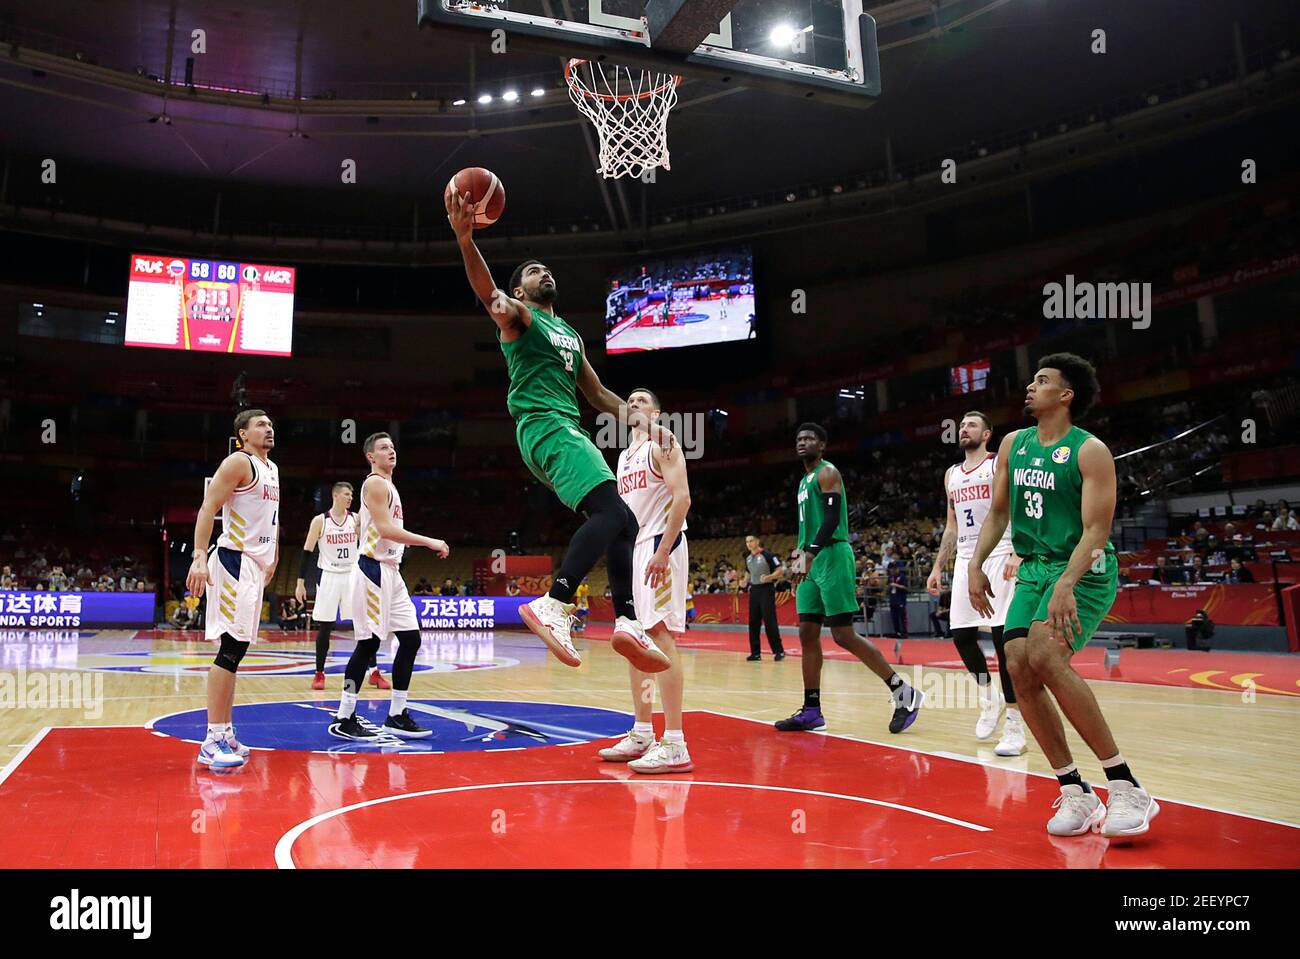 Basketball - FIBA World Cup - Russia v Nigeria - Wuhan Sports Center, Wuhan, China - August 31, 2019 Nigeria's Nnamdi Vincent in action REUTERS/Jason Lee Stock Photo